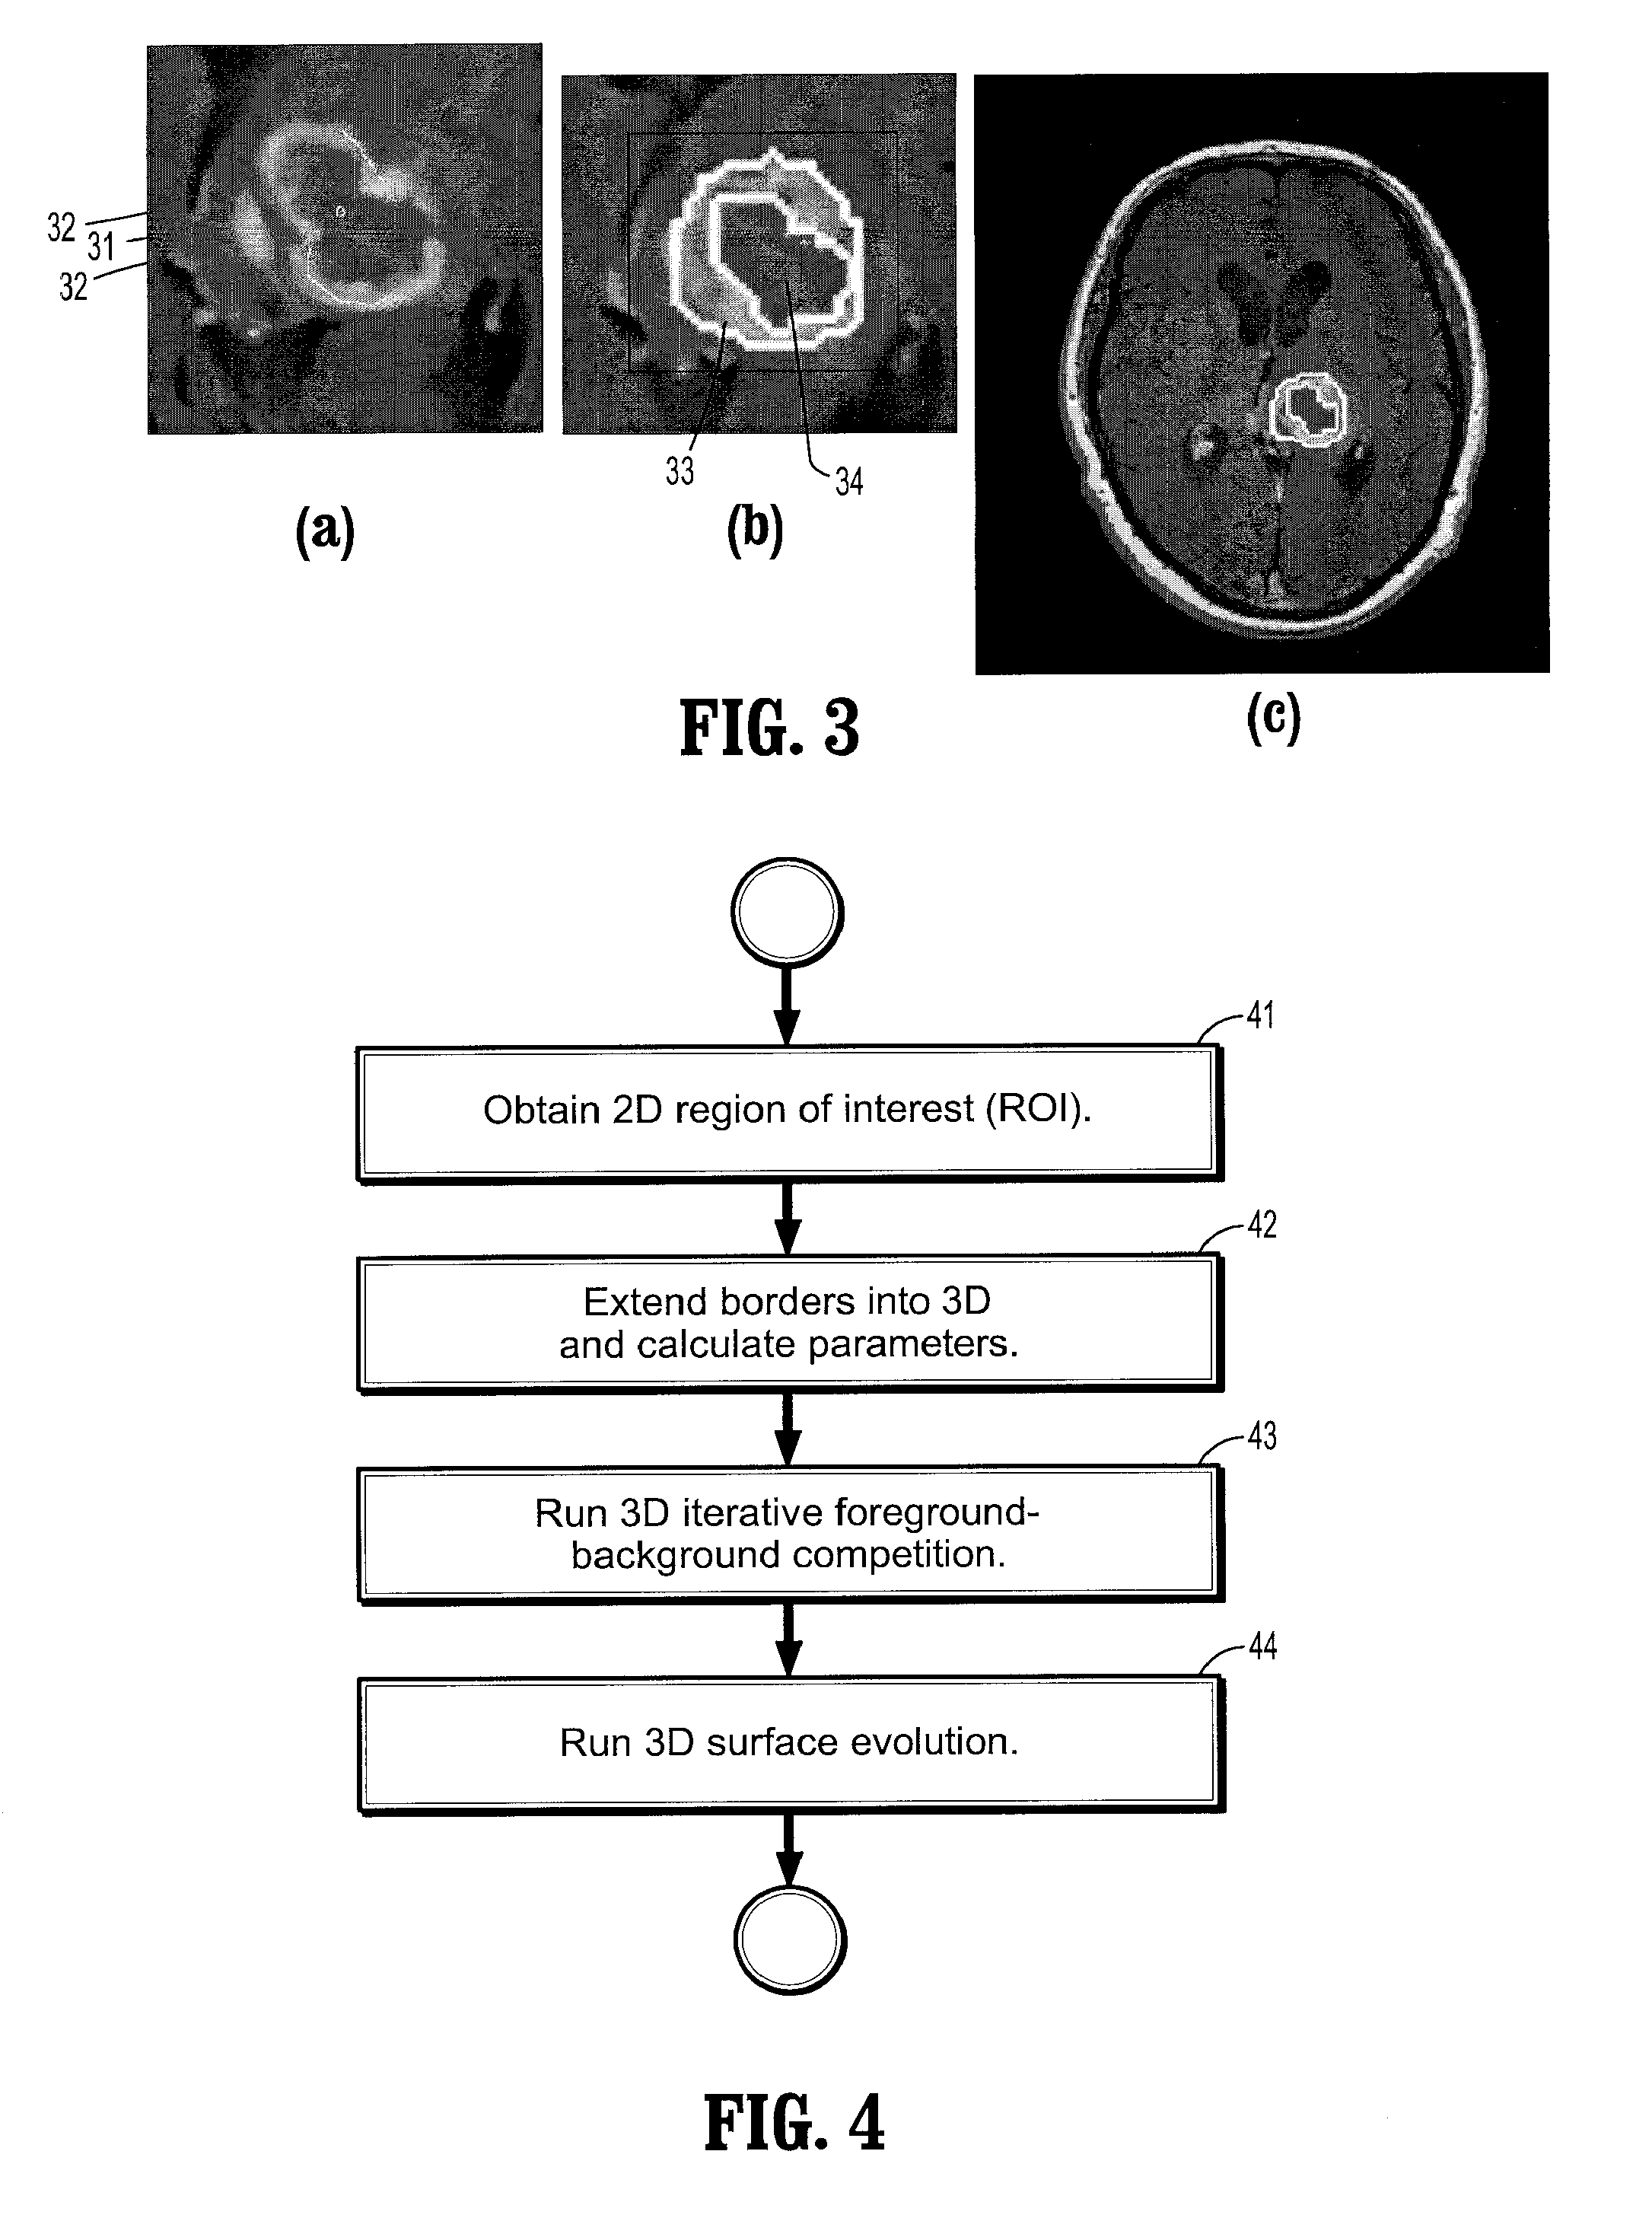 System and Method for Lesion Segmentation in Whole Body Magnetic Resonance Images